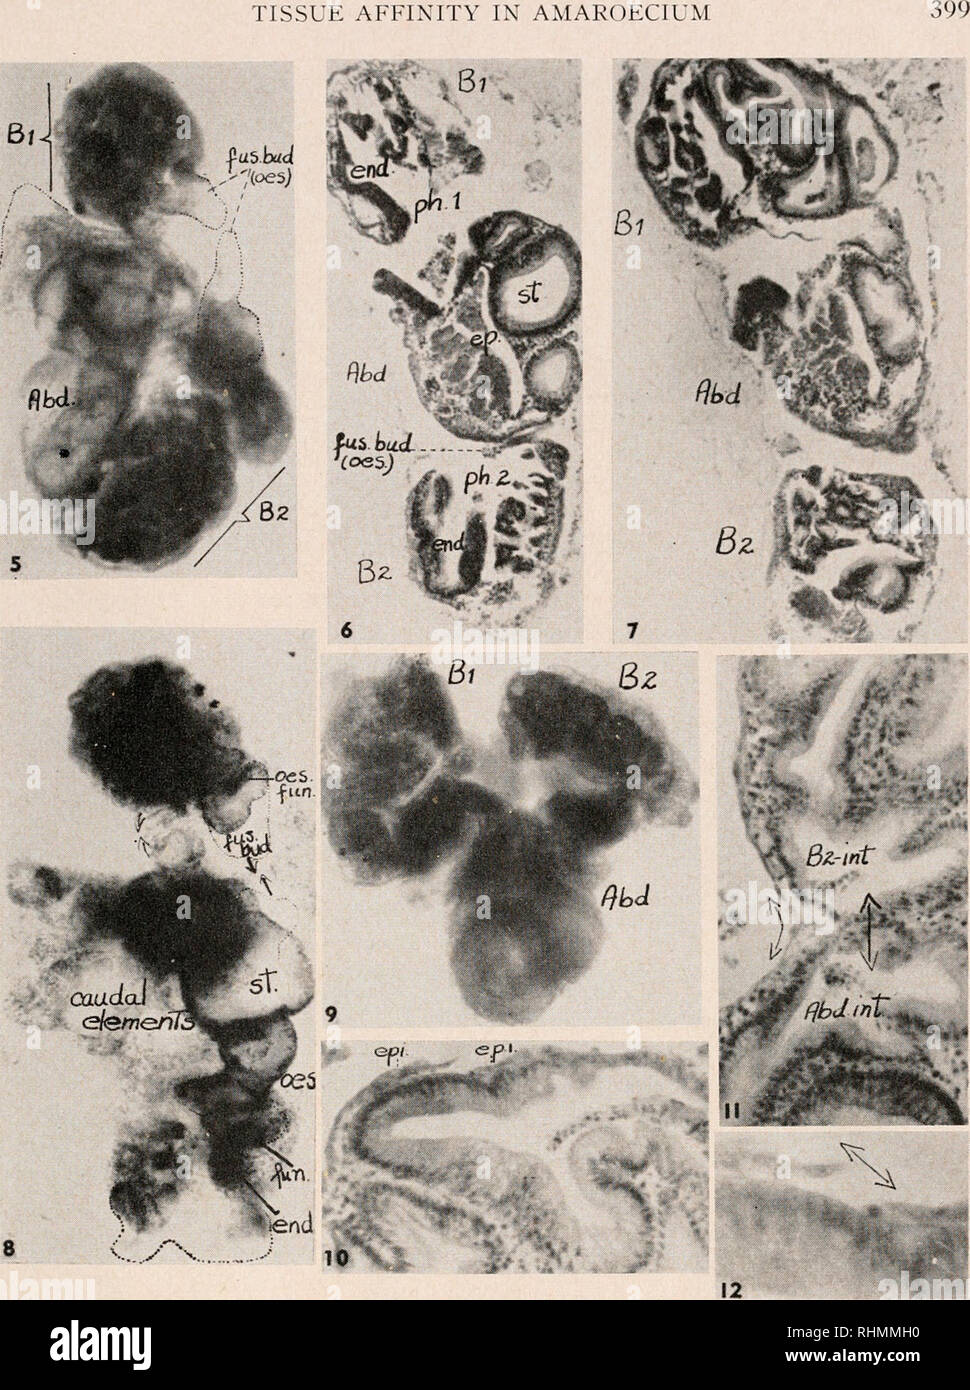 . The Biological bulletin. Biology; Zoology; Biology; Marine Biology. TISSUE AFFINITY IN AMAROECIUM Bi. FIGURE 5. Whole mount of composite after six hours. FIGURES 6 and 7. Longitudinal sections, three-hour combinations. FIGURE 8. Whole mount after nine hours. FIGURE 9. W'hole mount of three-hour combination. FIGURES 10, 11 and 12. Sections of three-hour combinations showing spreading of epi- dermis and union of abdominal and branchial intestinal fragments. (About 90 X.) abd. int., abdominal intestine; B2-int., branchial intestine; end., endostyle; ep., epicardium; epi., epidermis; oes. fun.,  Stock Photo